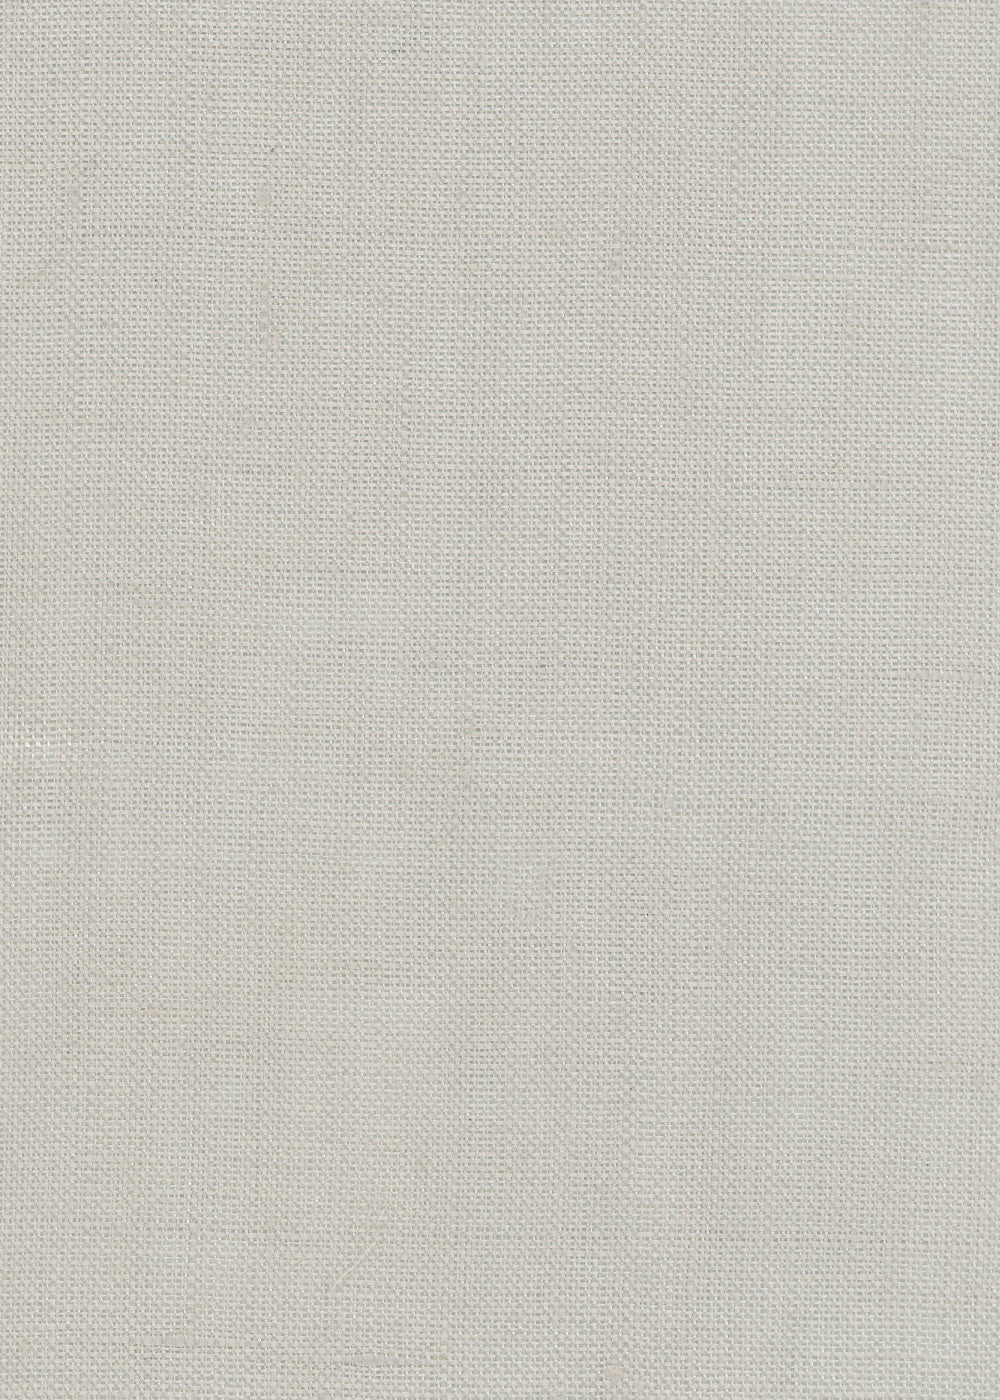 pale dove grey fabric that is glazed